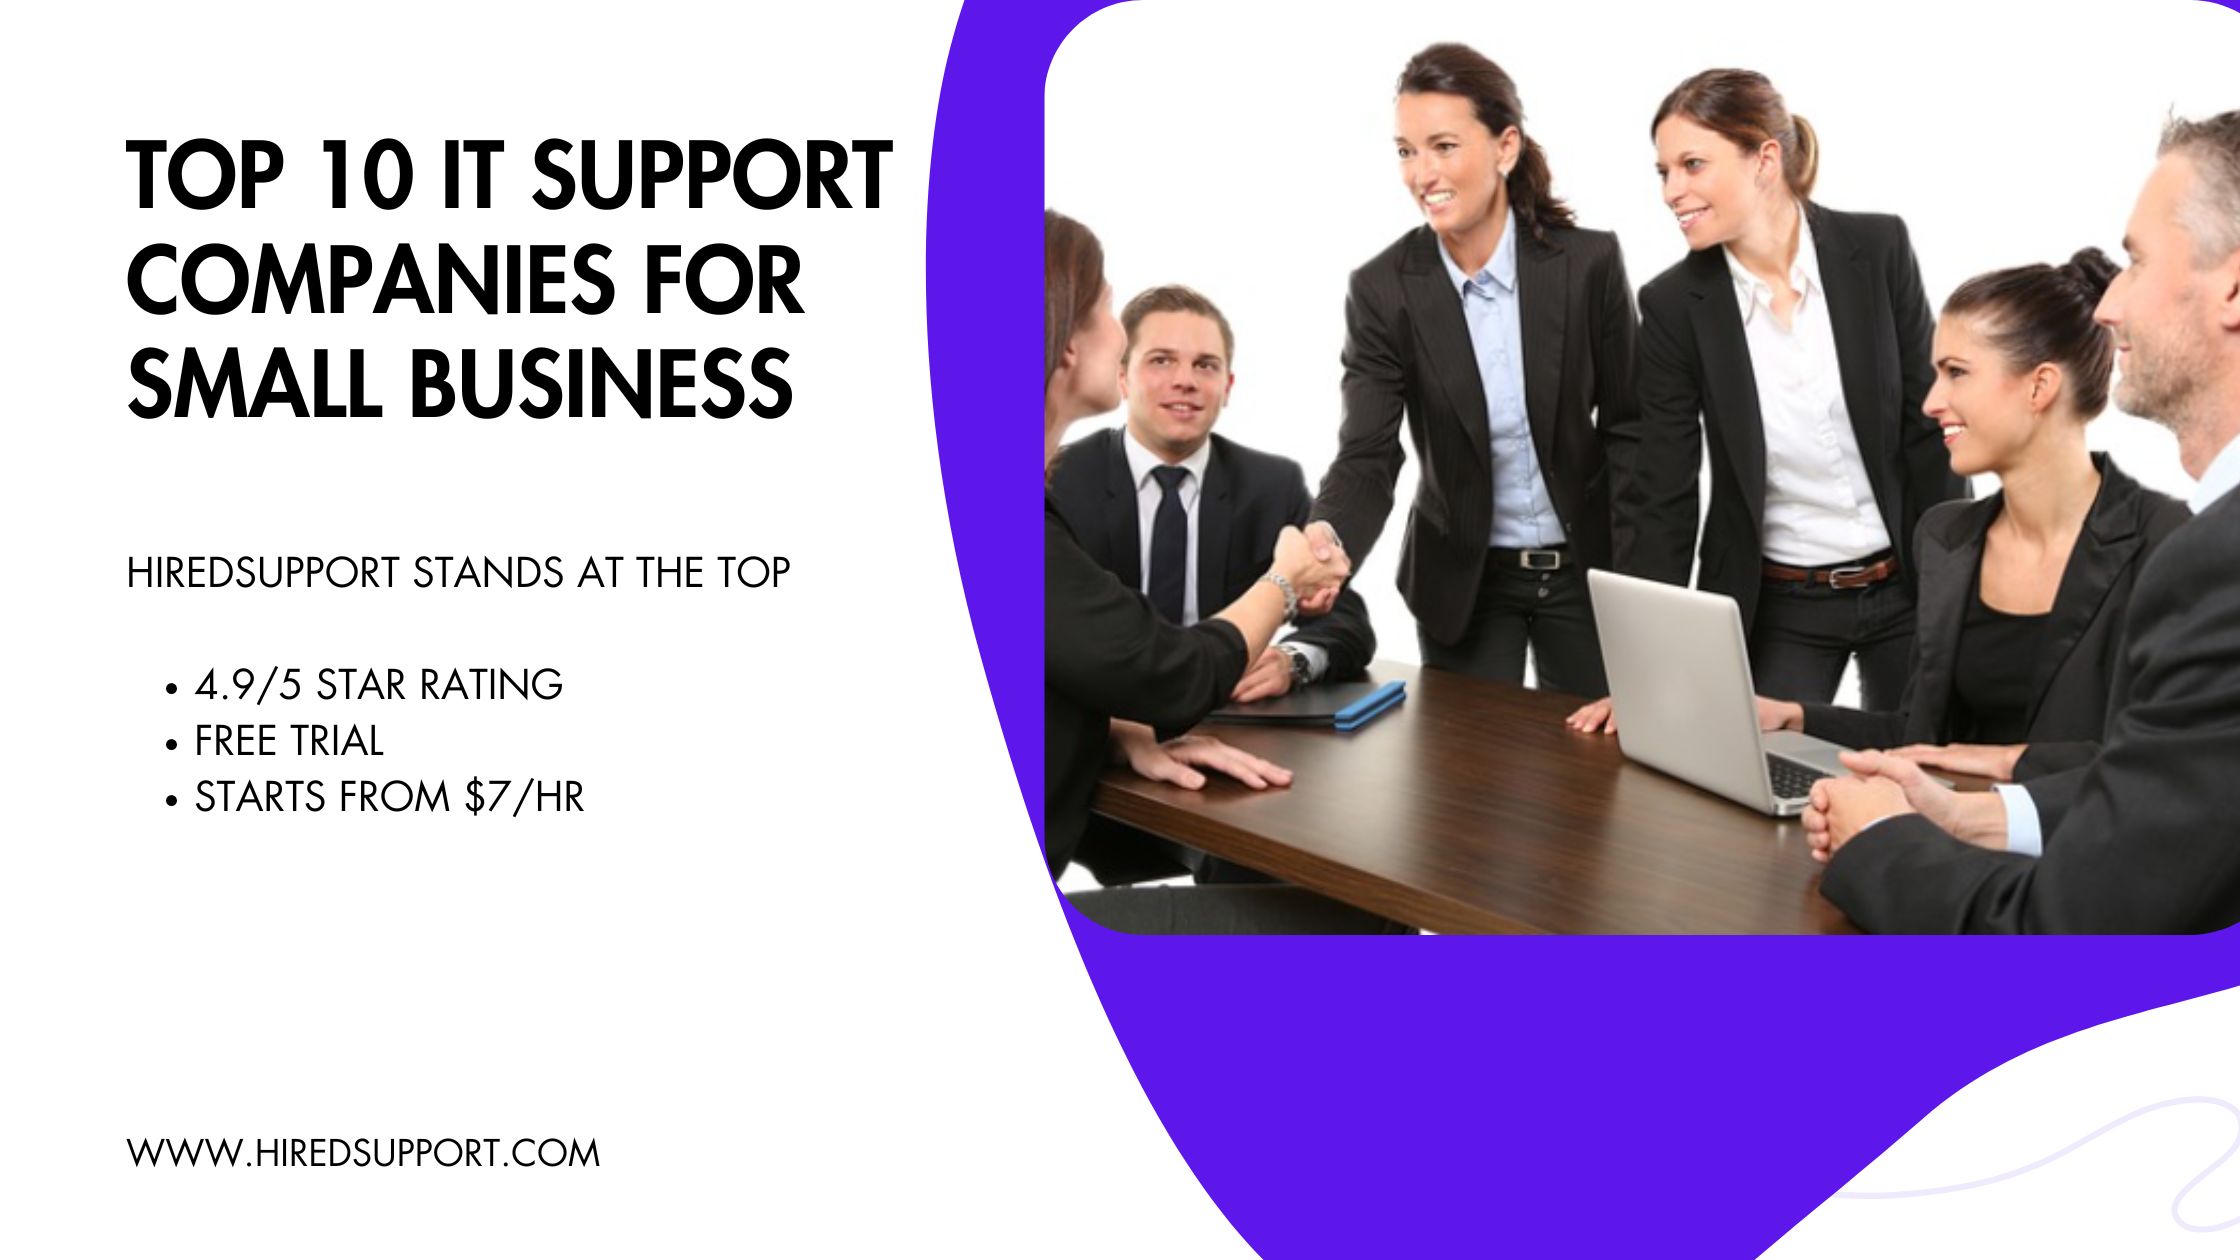 Top 10 IT Support Companies for Small Business